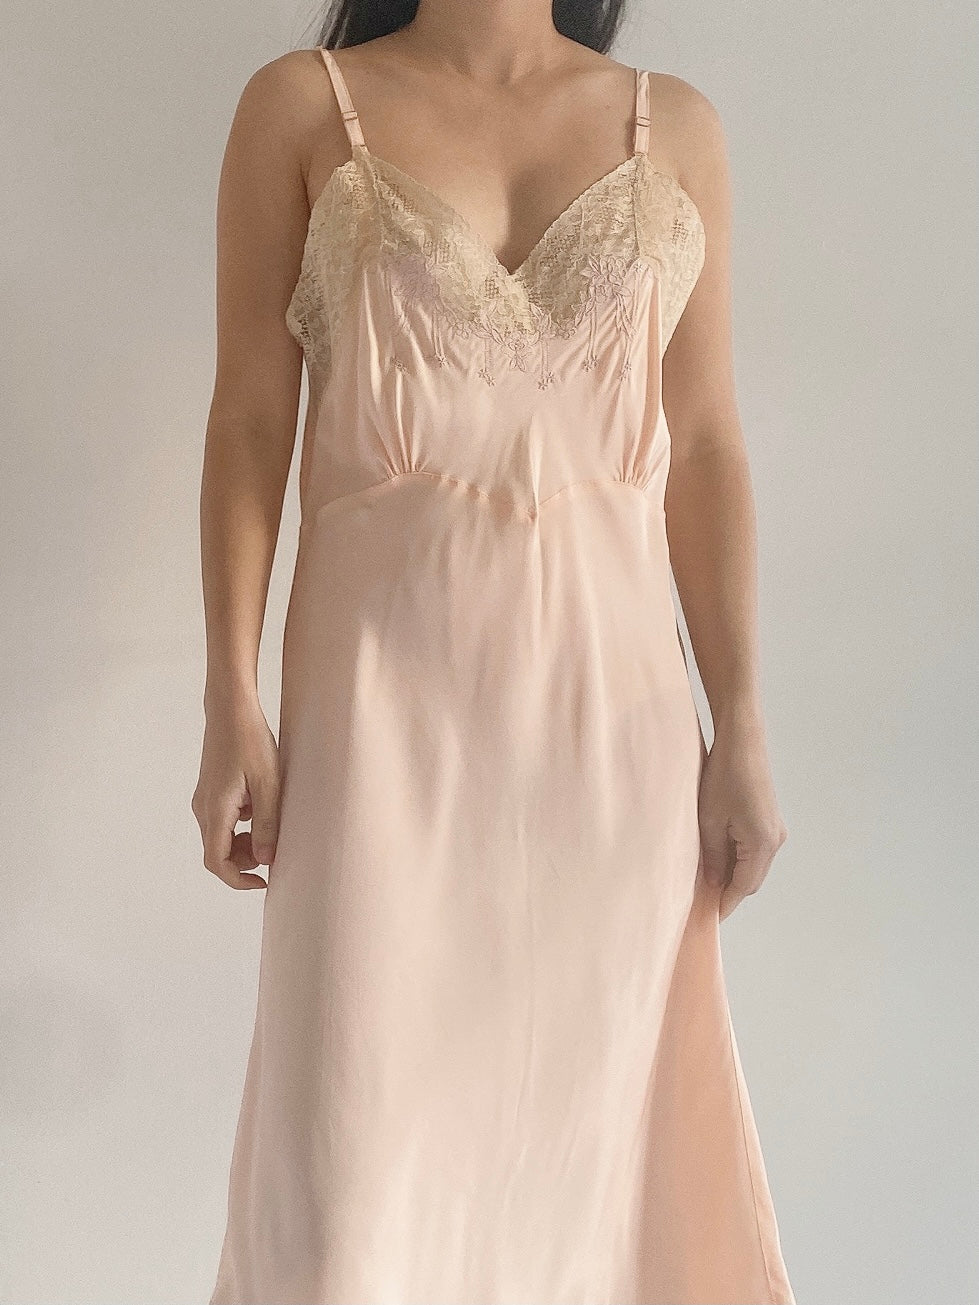 1930s Dusty Pink Rayon Satin Bias Slip Gown - S/M